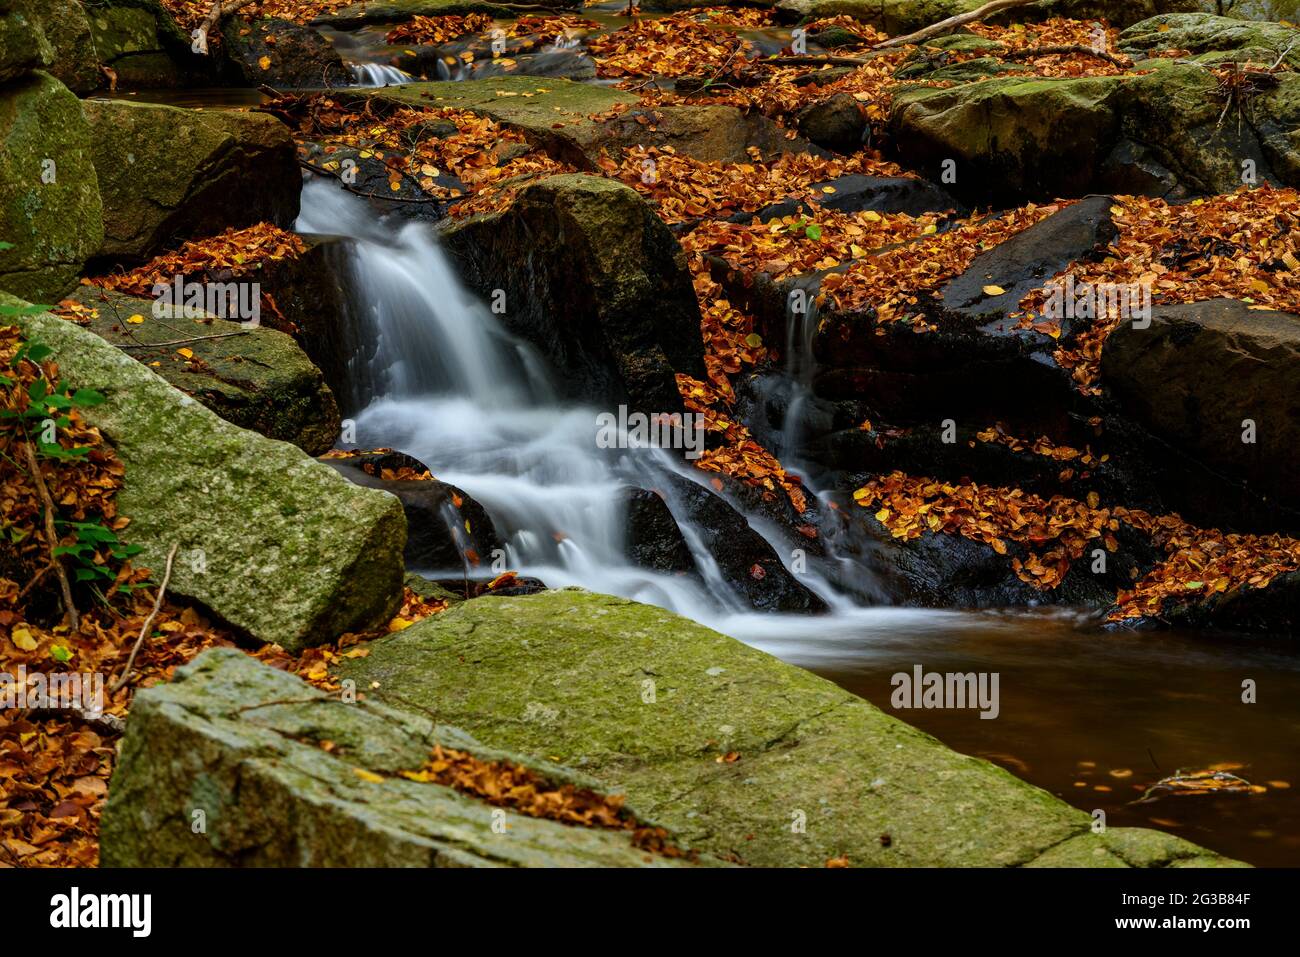 Detail of leaves and movement of water in the Riera de Gualba stream, in autumn, in Montseny (Vallès Oriental, Barcelona, Catalonia, Spain) Stock Photo